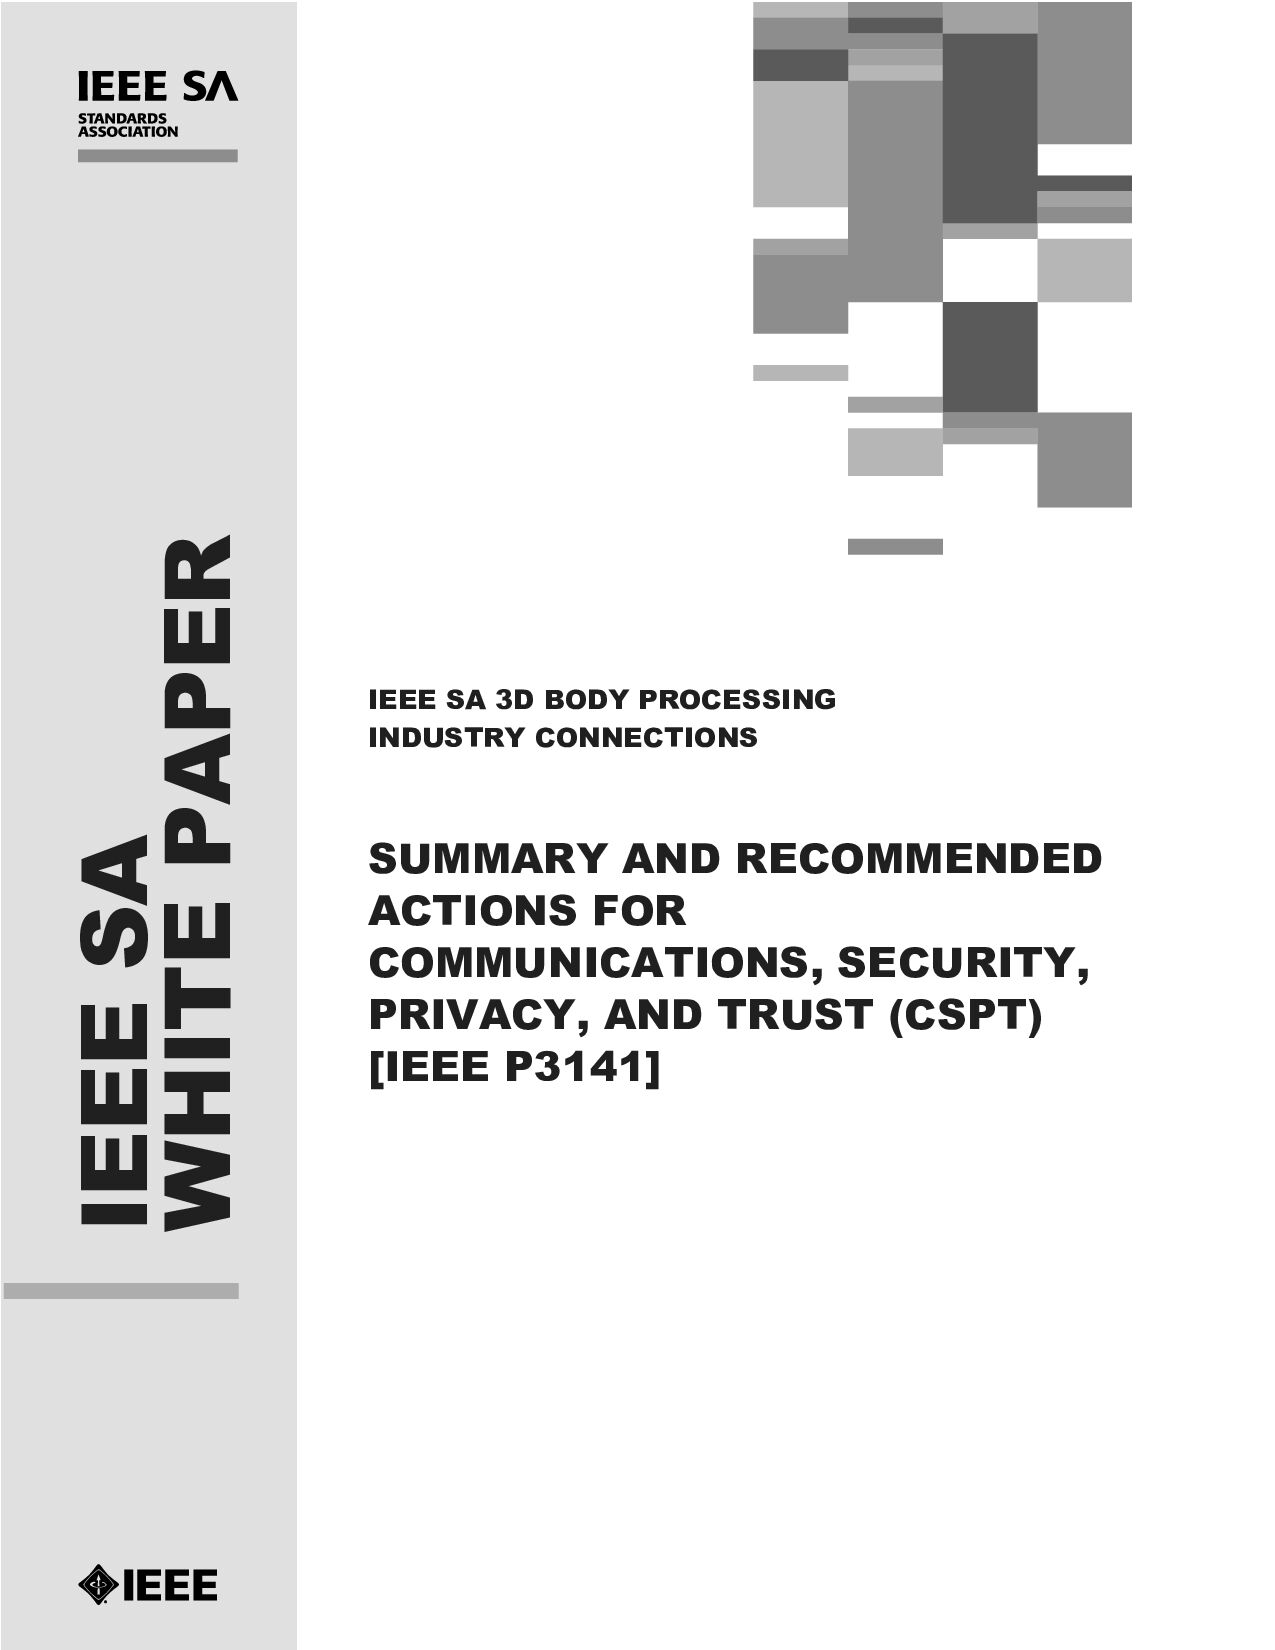 Summary and recommended actions for communications, security, privacy, and trust (CSPT) [IEEE P3141]封面图